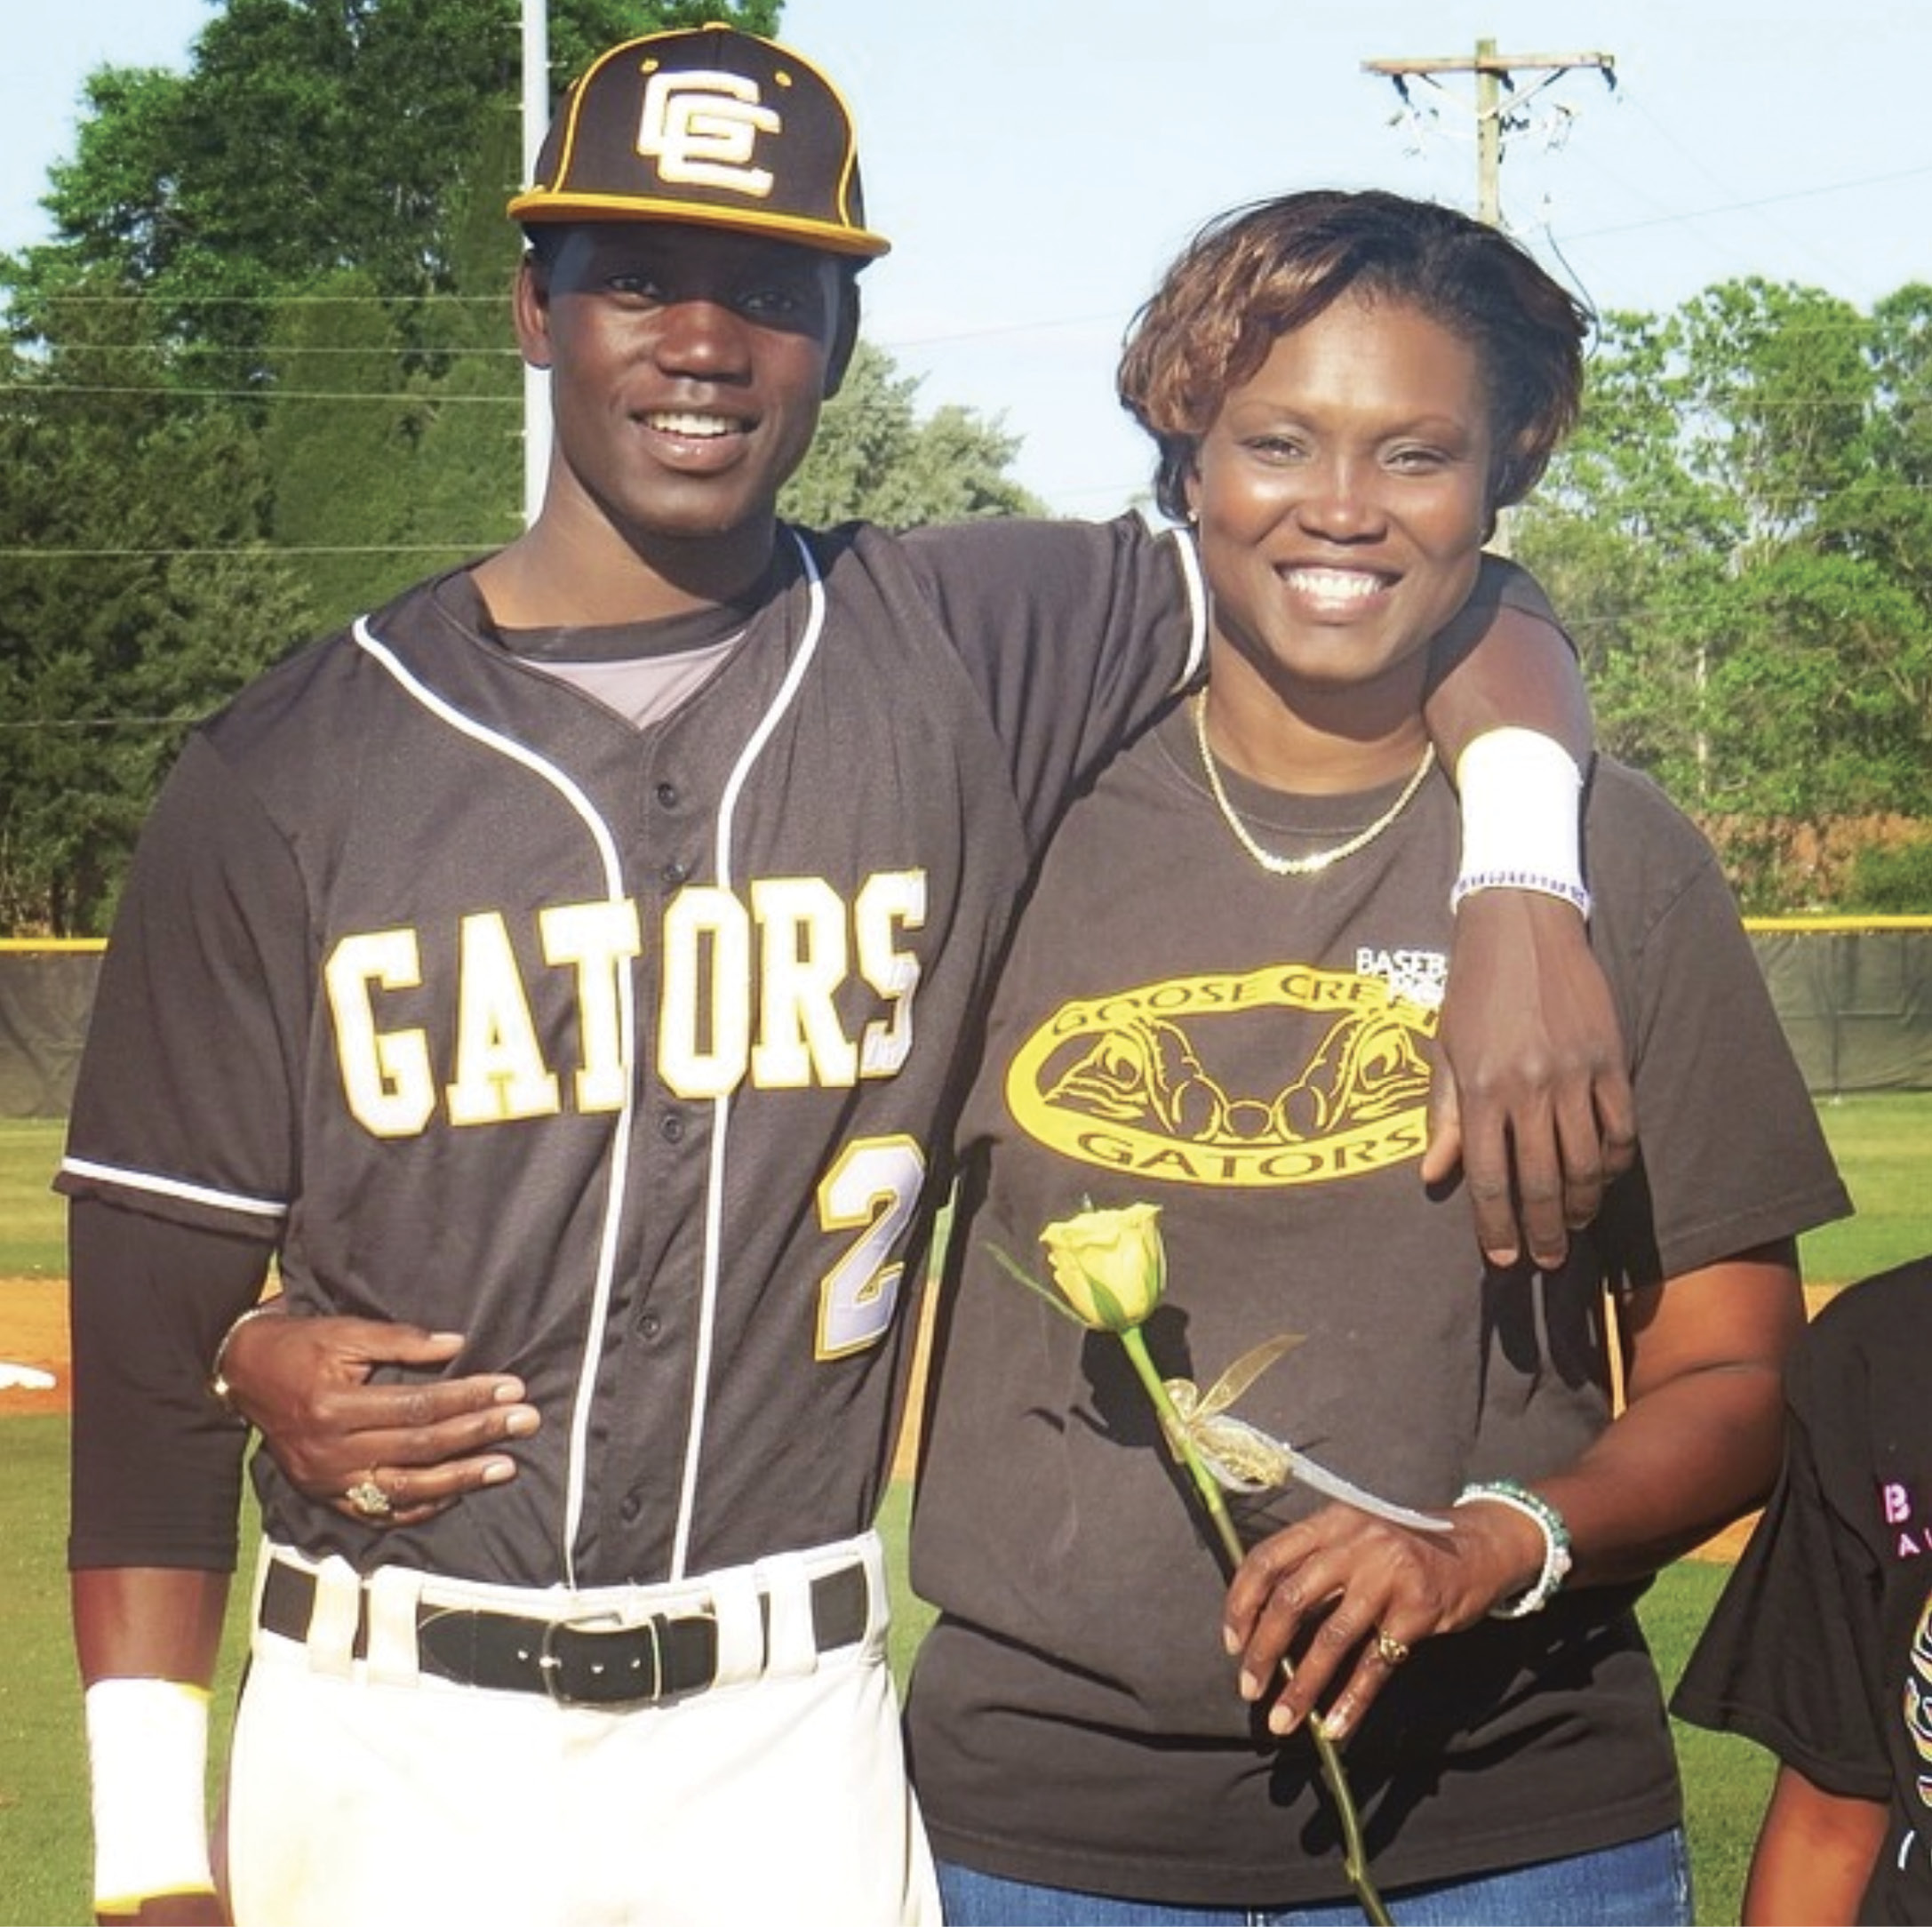 Most Valuable Mom: Chris pictured with his mom in April 2014 at Senior Night for Goose Creek High School, where he was a standout player before playing for Charleston Southern University. #MyMomIsTheRealMVP was a favorite hashtag for many of his social media posts prior to his mom’s death